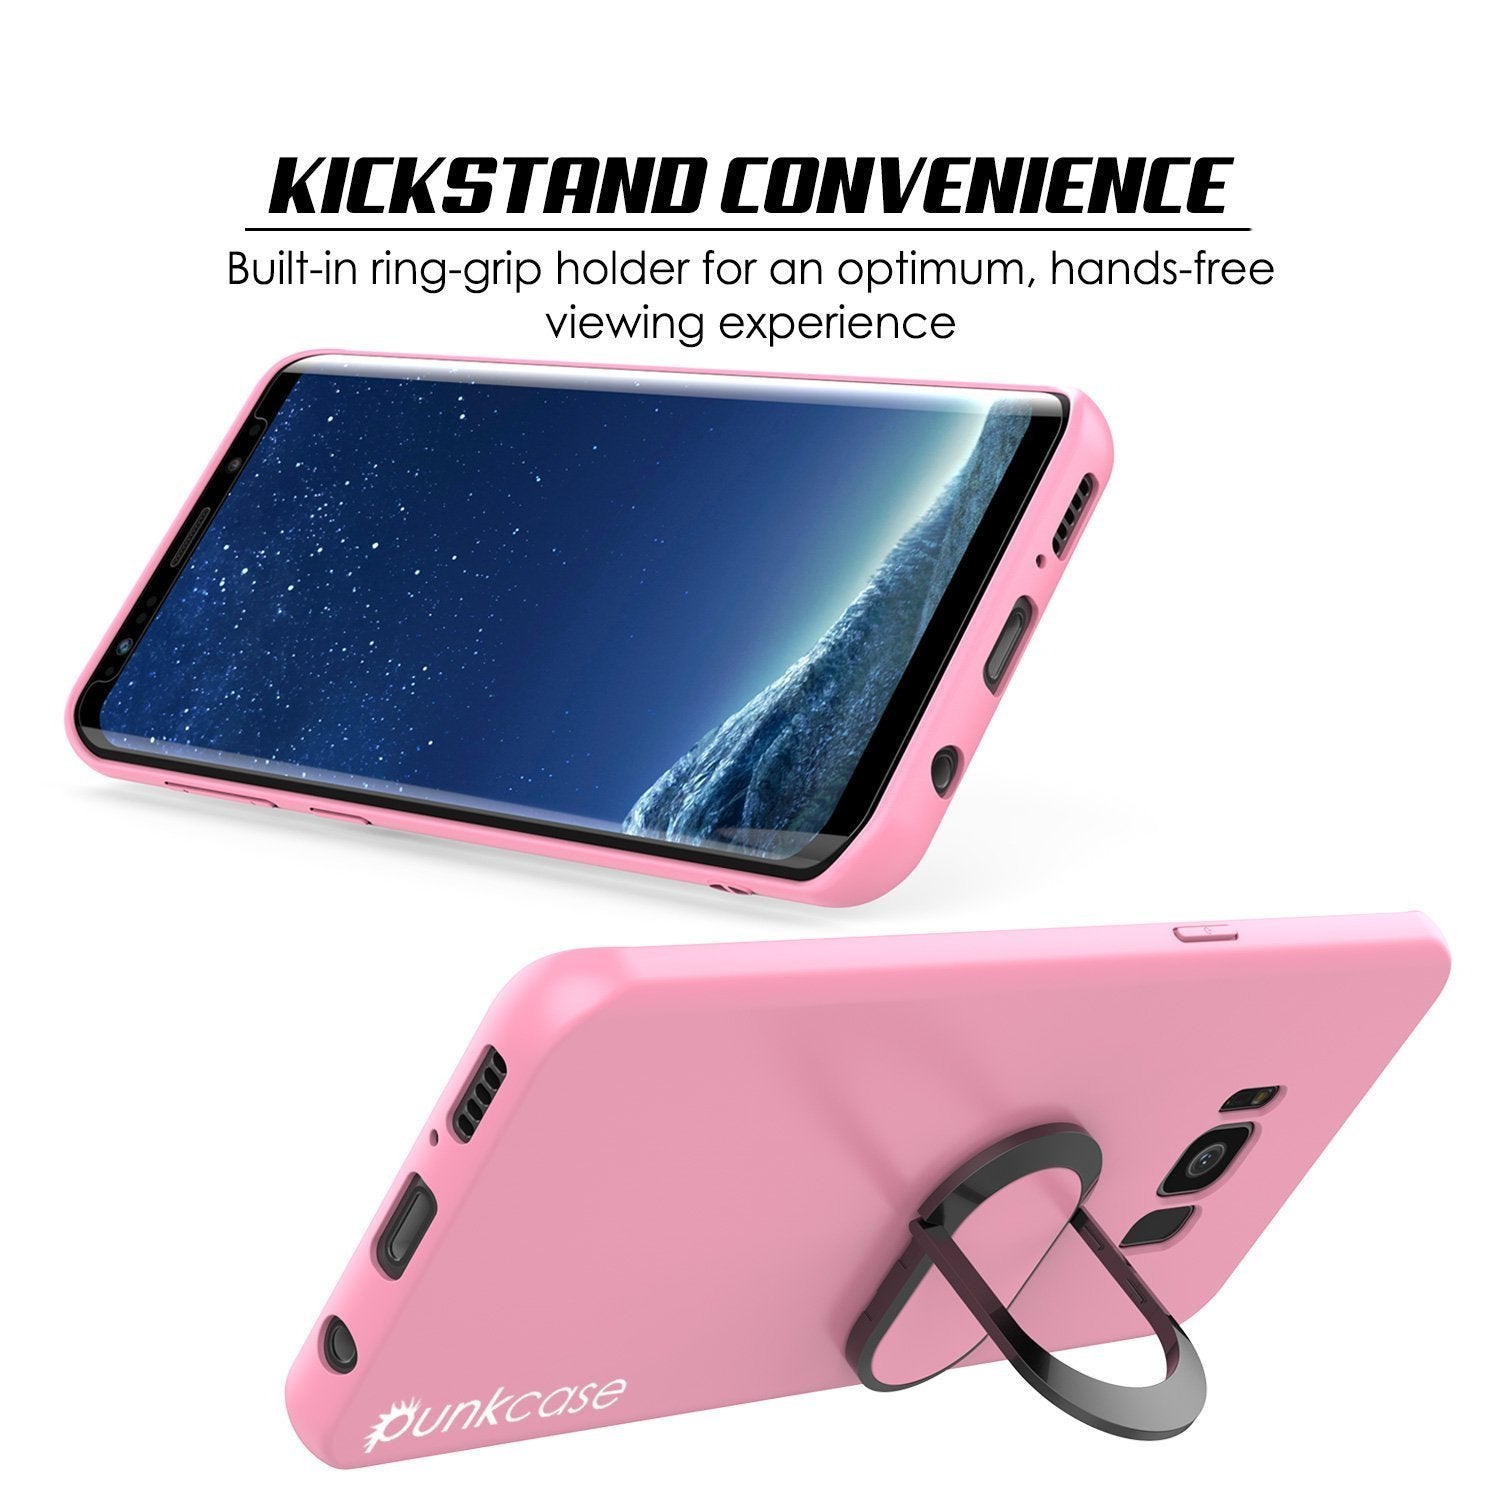 Galaxy S8 Case, Punkcase Magnetix Protective TPU Cover W/ Kickstand, Screen Protector [Pink]